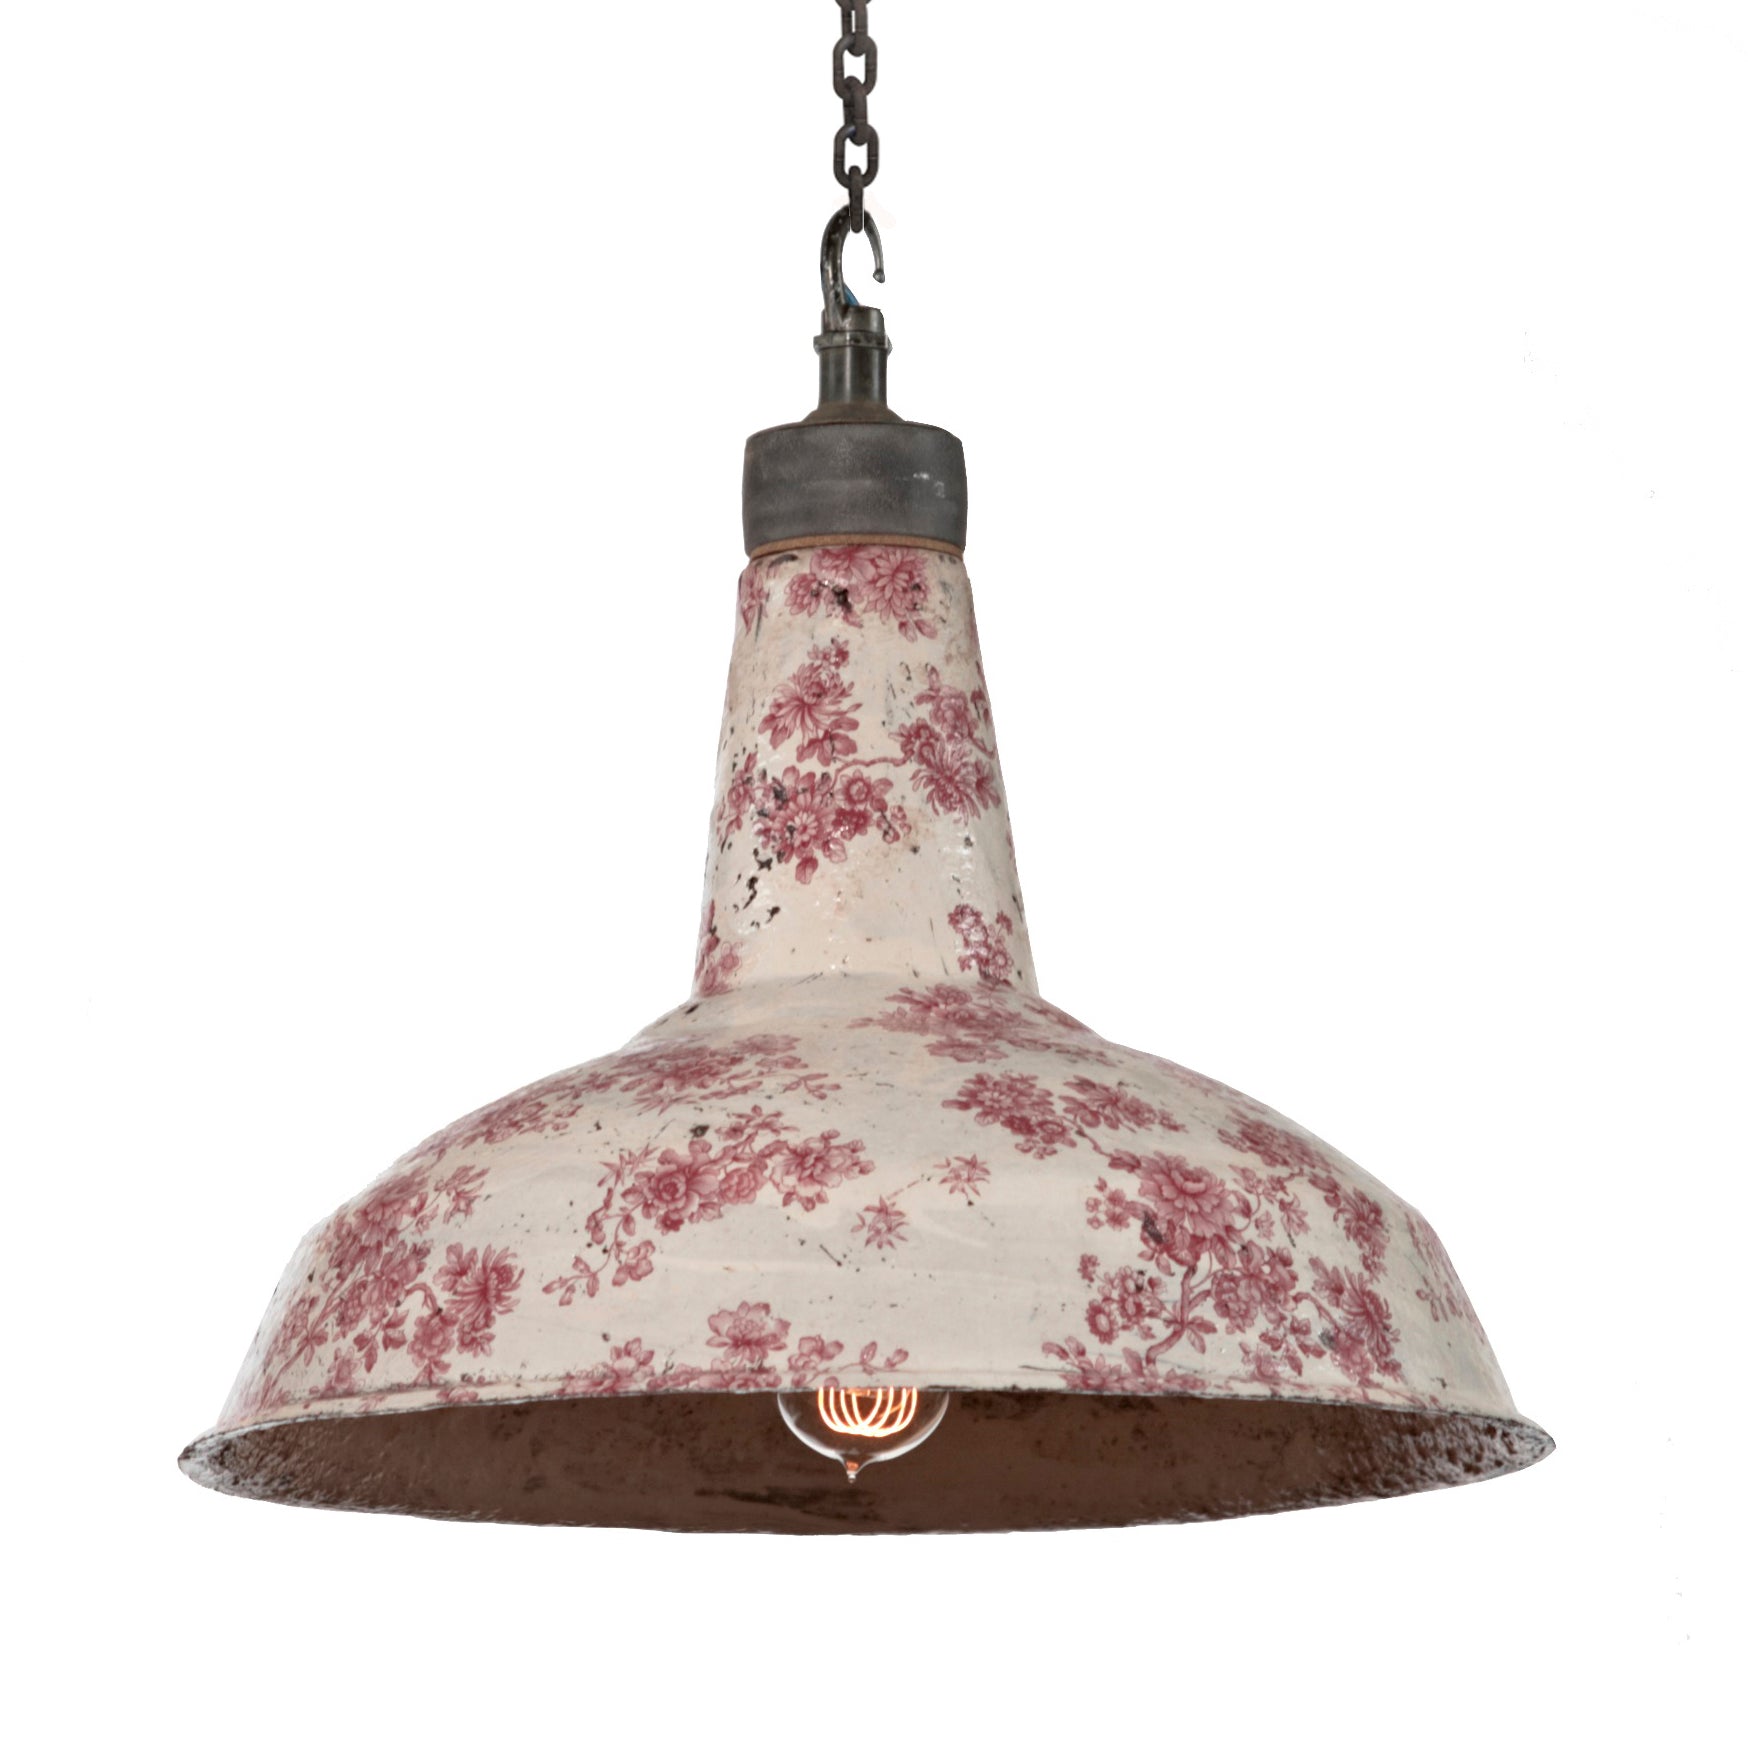 Aditi Studios Flying Scotsman ceramic pendant light in pink floral from Warehouse Home 